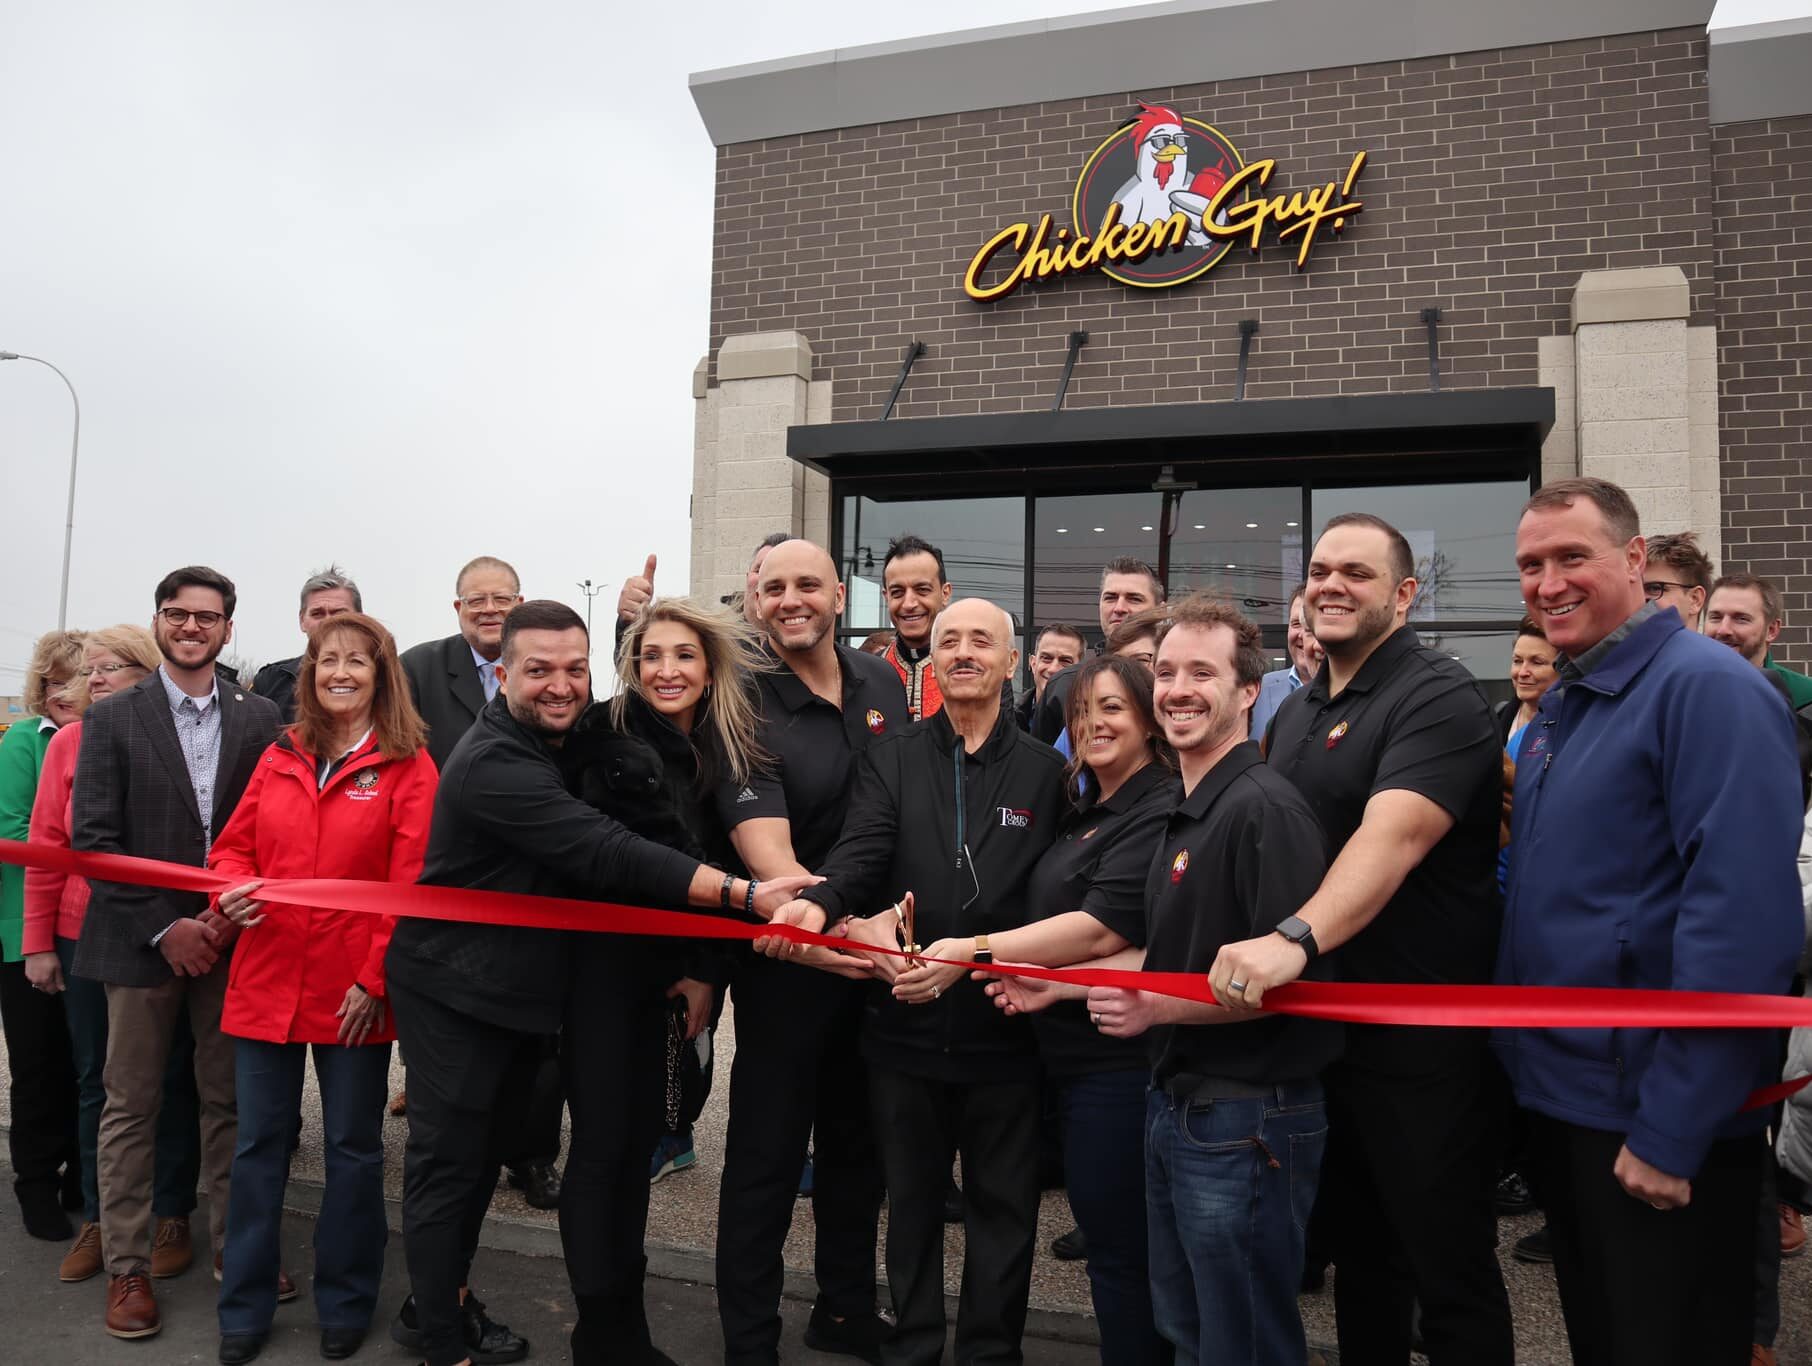 Members of The Tomey Group and the Livonia Chamber of Commerce are pictured during the Chicken Guy ribbon cutting ceremony